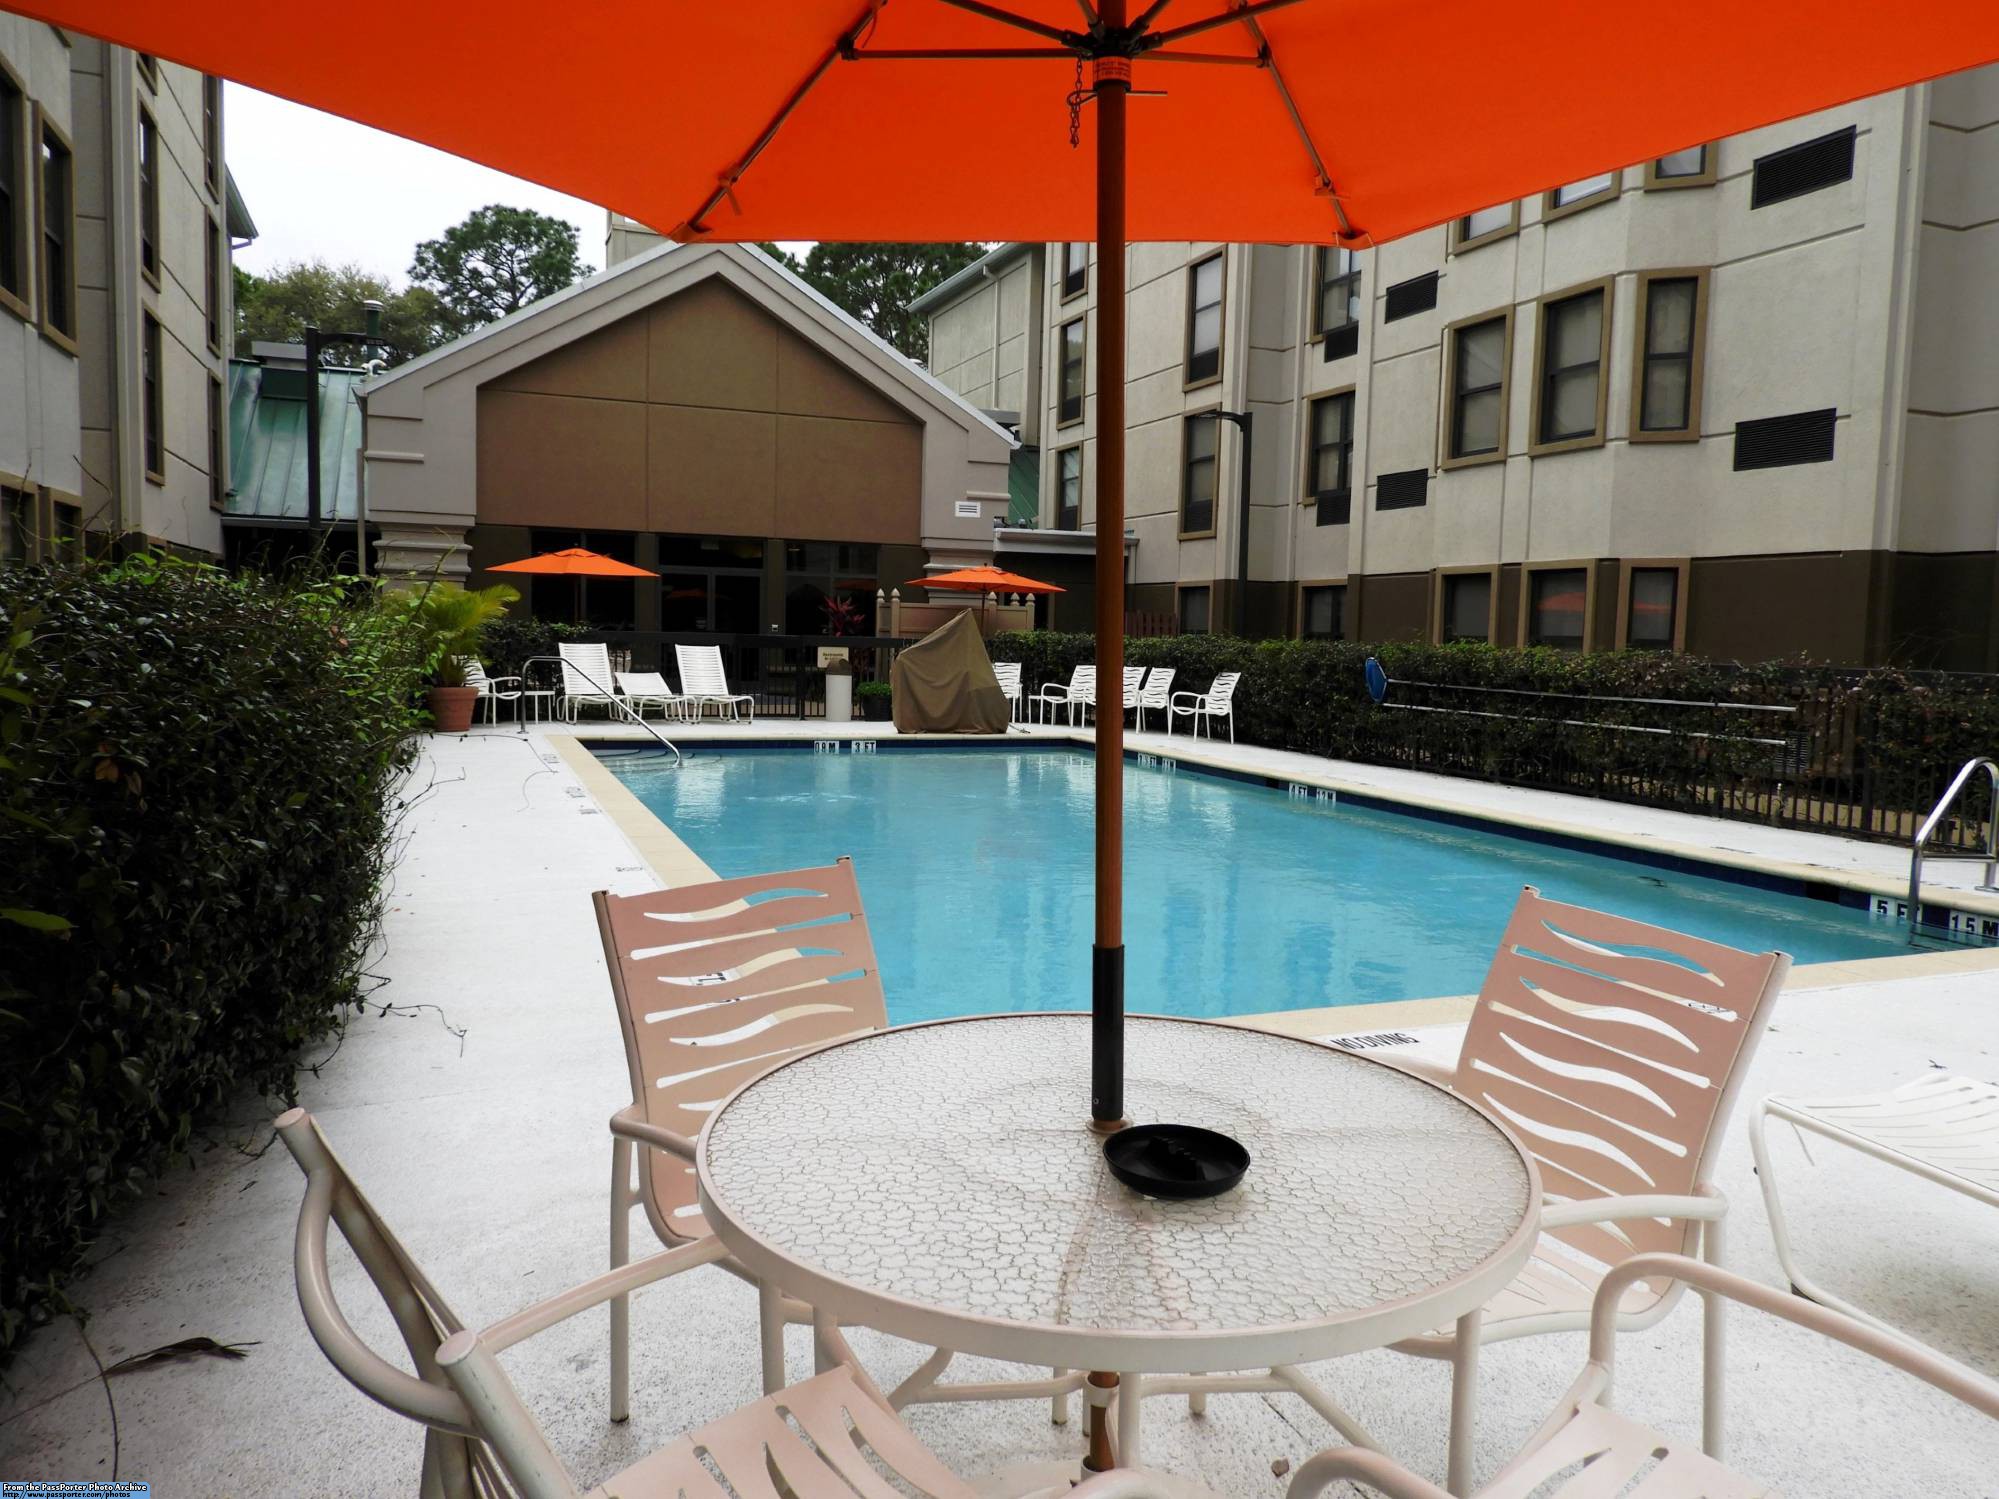 Courtyard by Marriott Tampa North